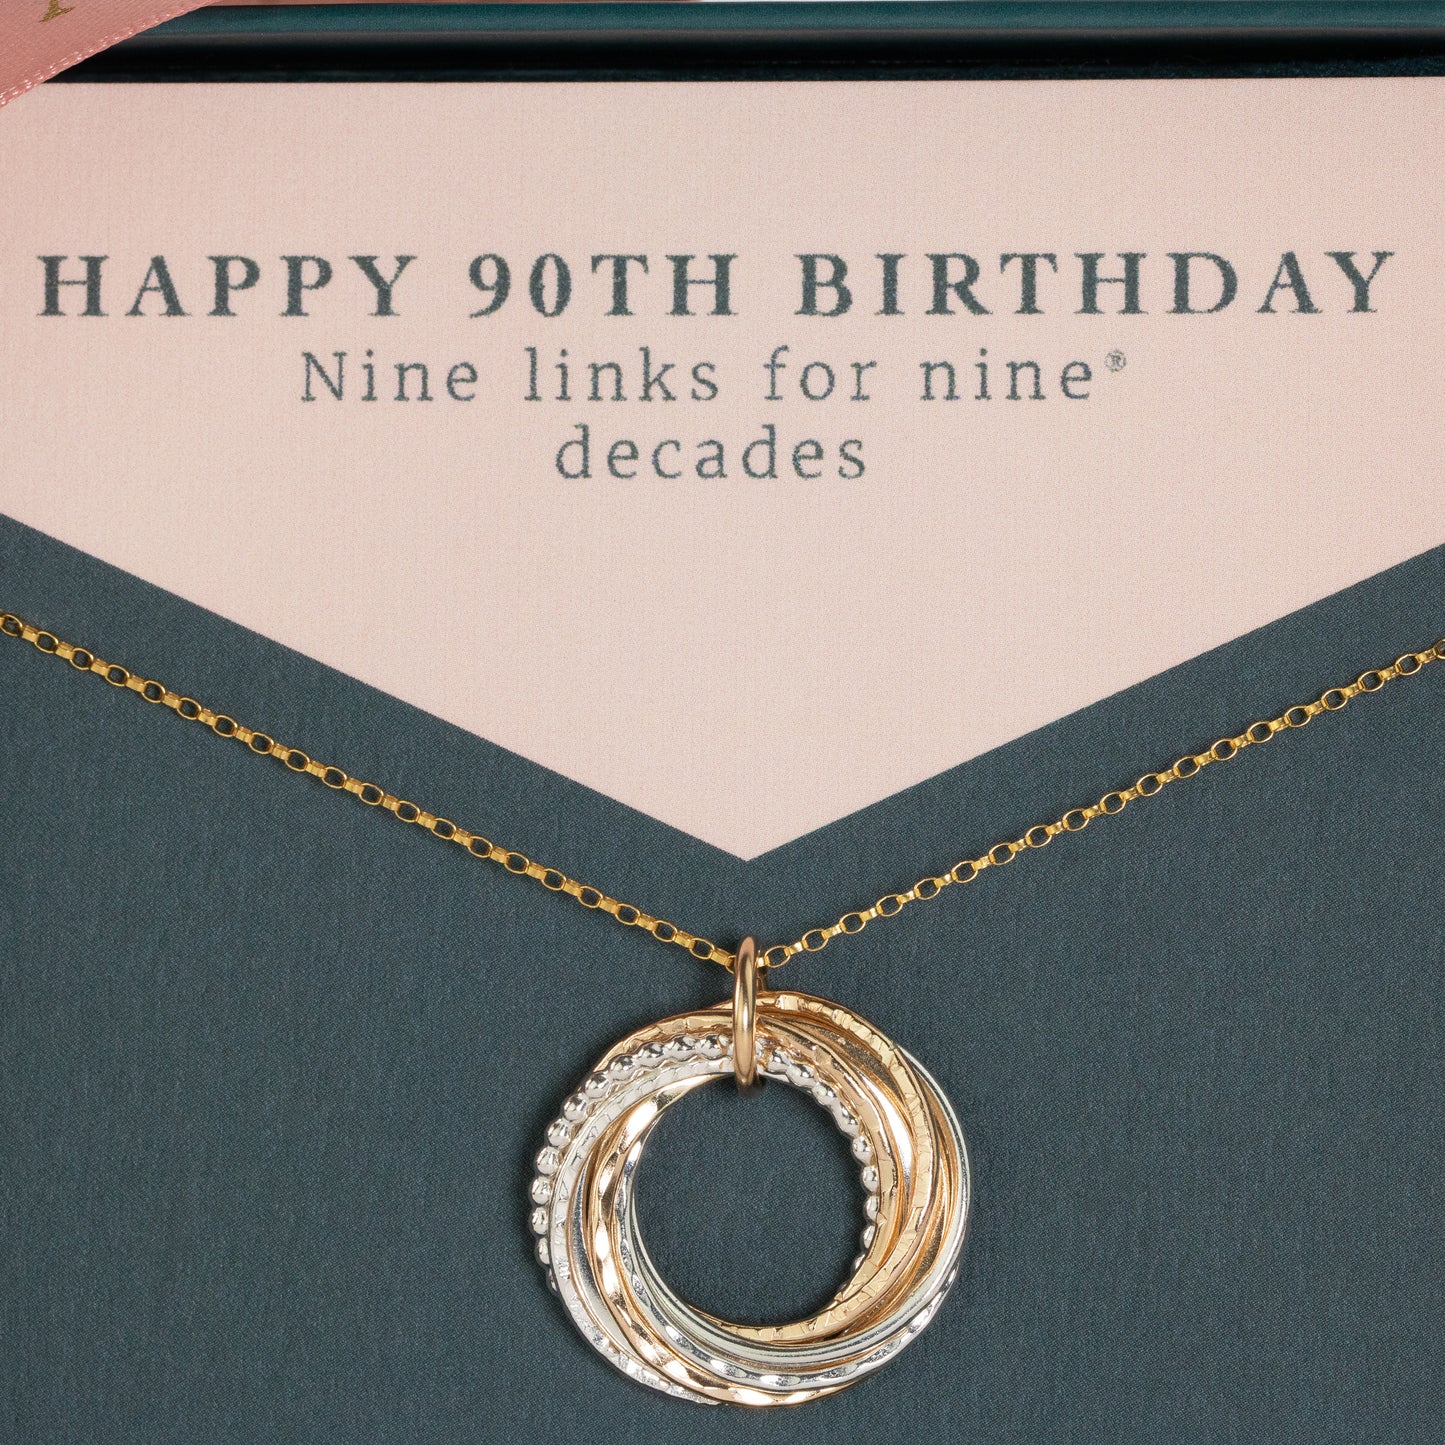 90th Birthday Necklace - The Original 9 Links for 9 Decades Necklace - Silver & Gold